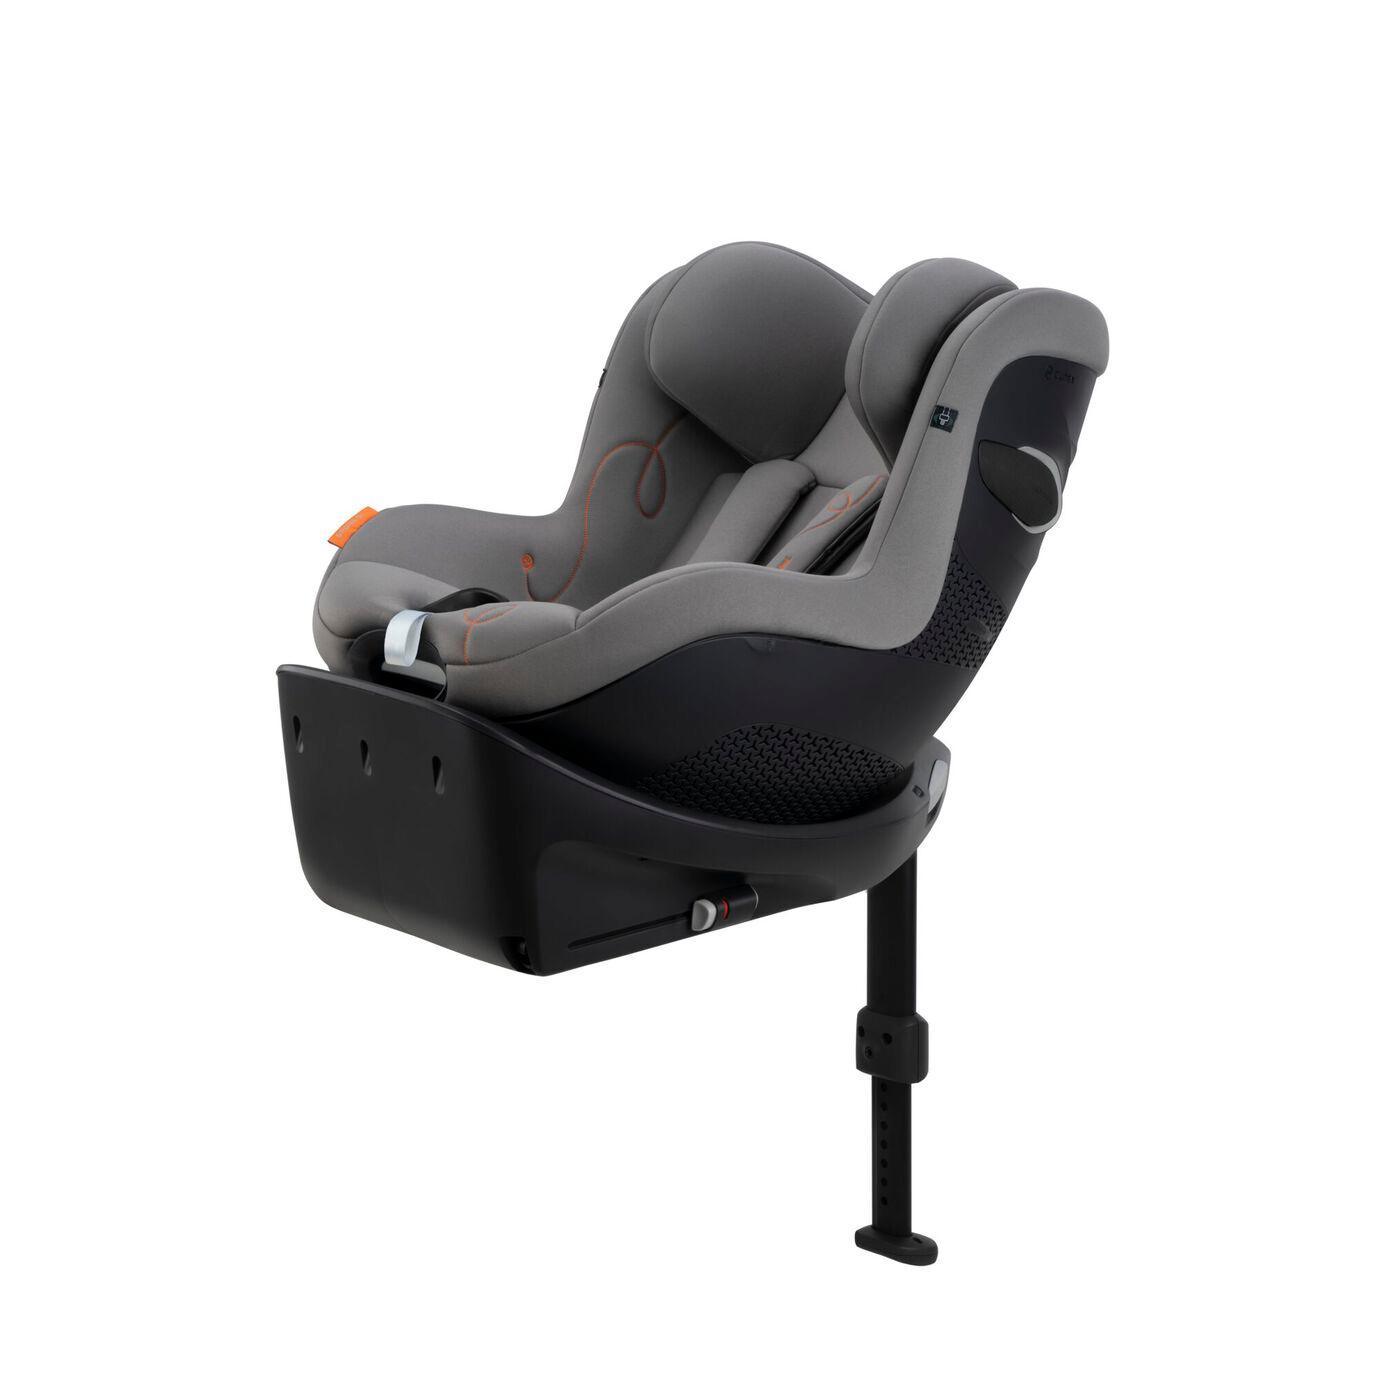 Buy Cybex Pallas G i-Size, In Car Safety Centre